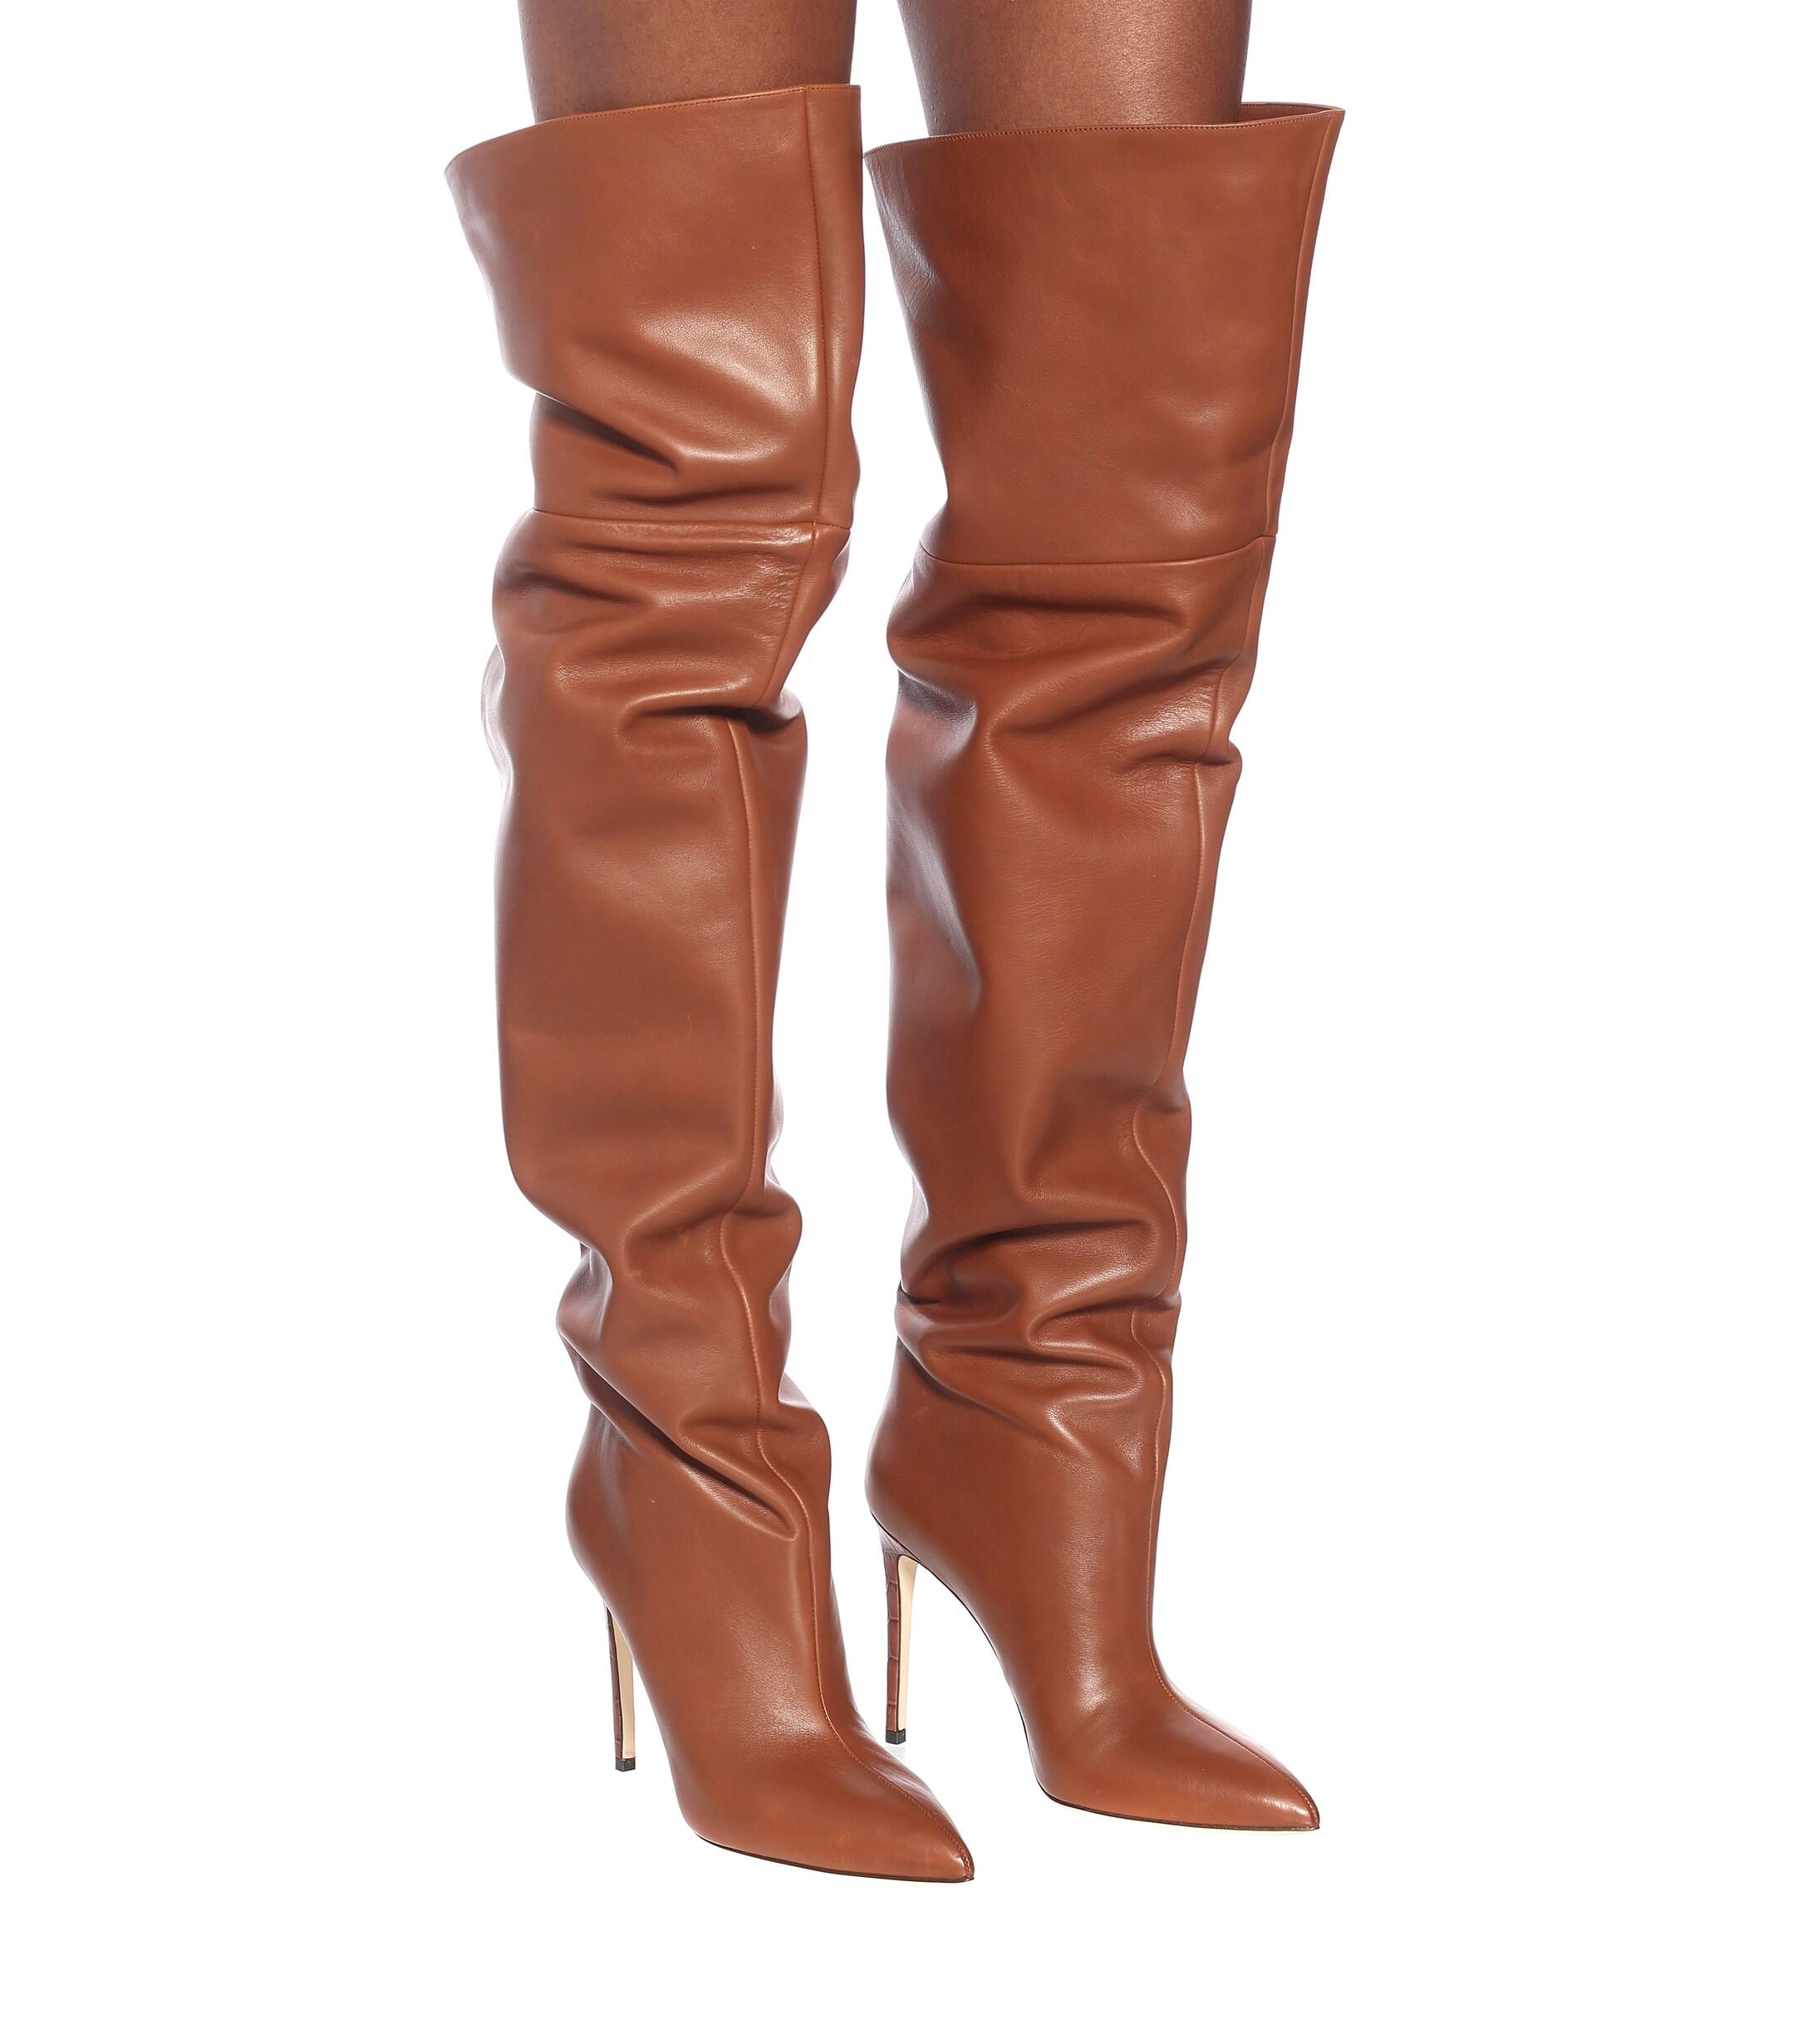 Paris Texas Leather Over-the-knee Boots in Brown | Lyst